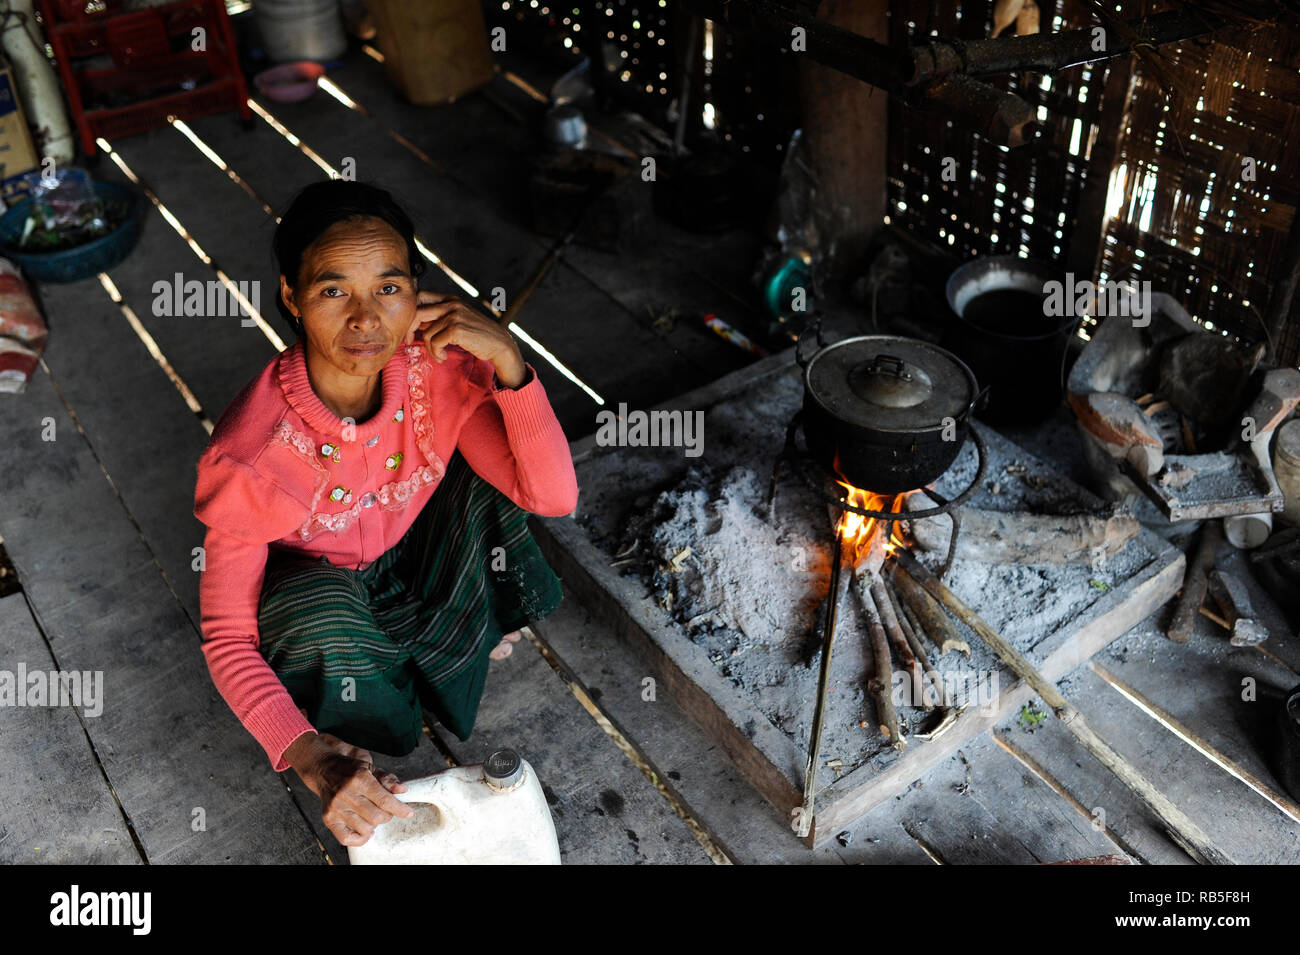 LAO PDR, province Oudomxay , village Houyta, ethnic group Khmu, woman cooks with firewood / LAOS Provinz Oudomxay Dorf Houyta , Ethnie Khmu , Frau Yi kocht mit Feuerholz in ihrer Kueche Stock Photo